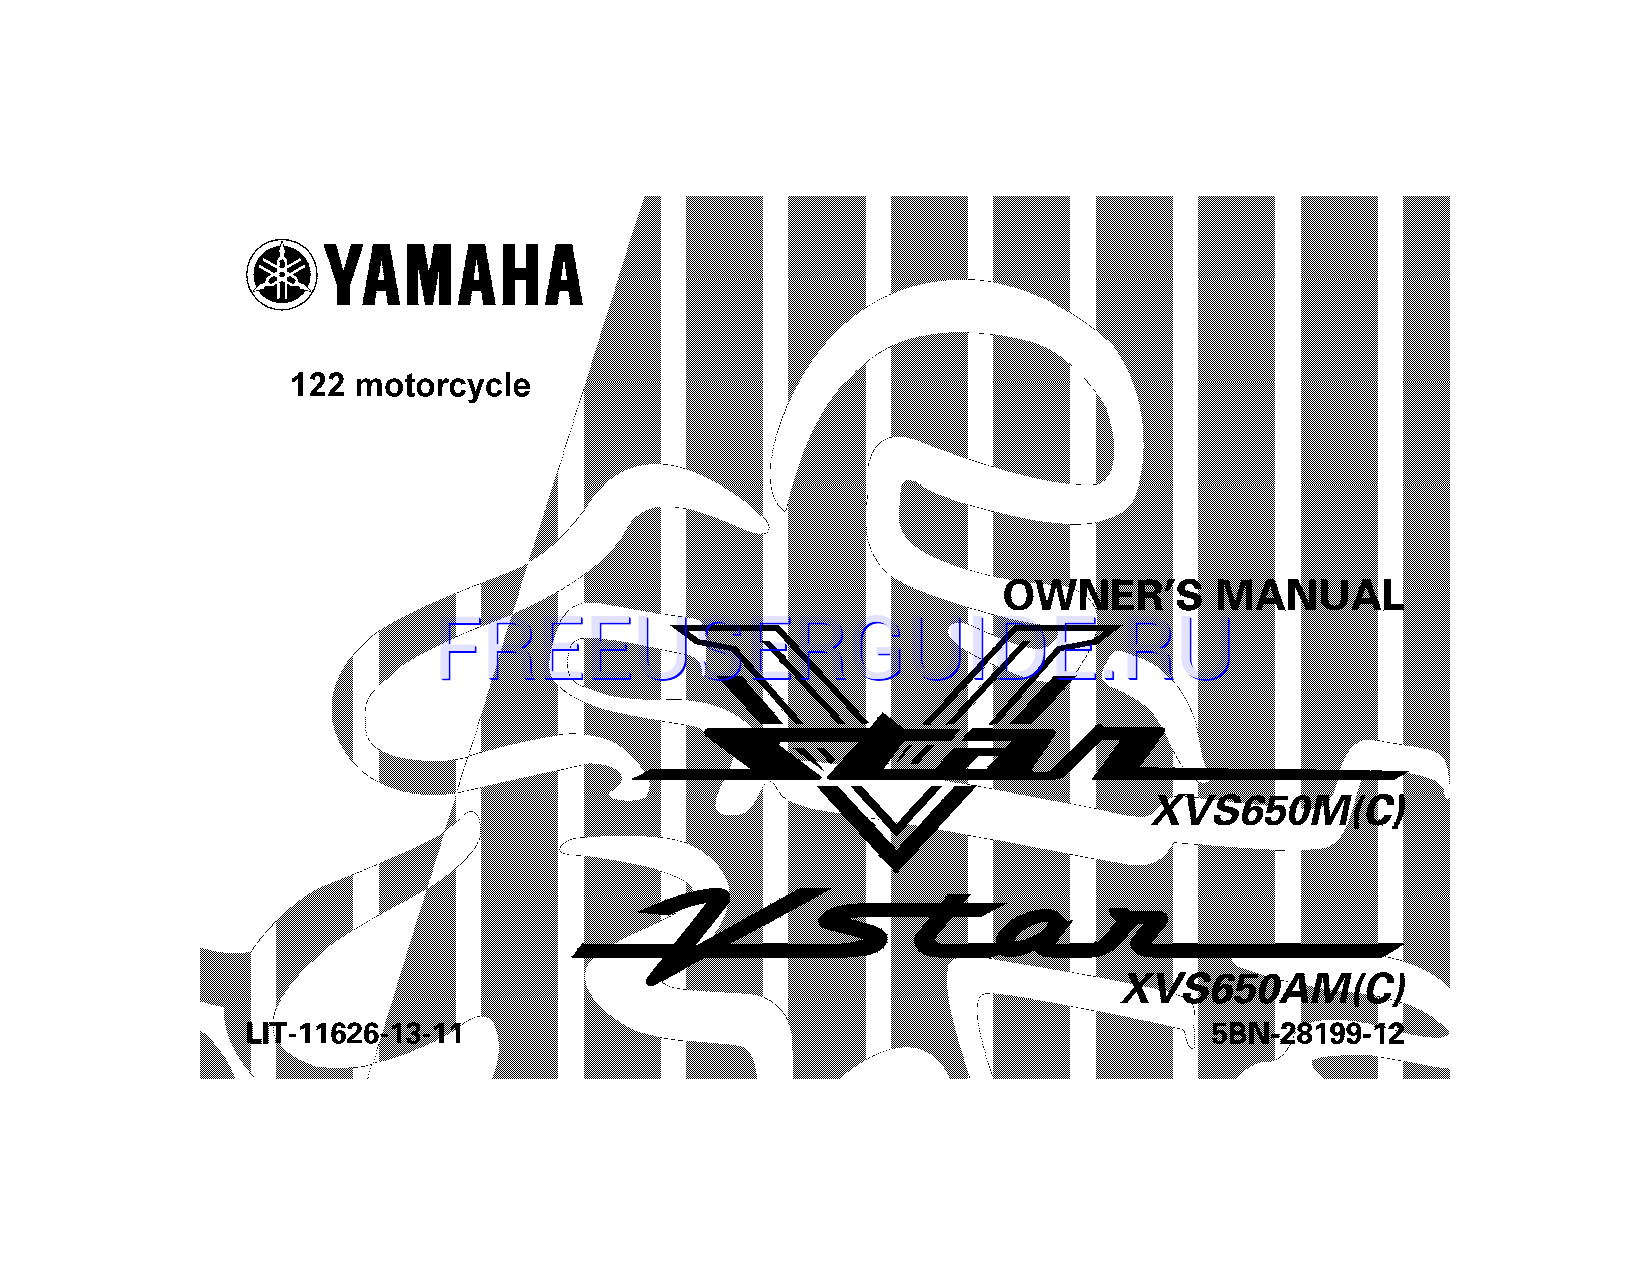 Read online Owner's Manual for Yamaha 2000 V Star Classic (Page 1)